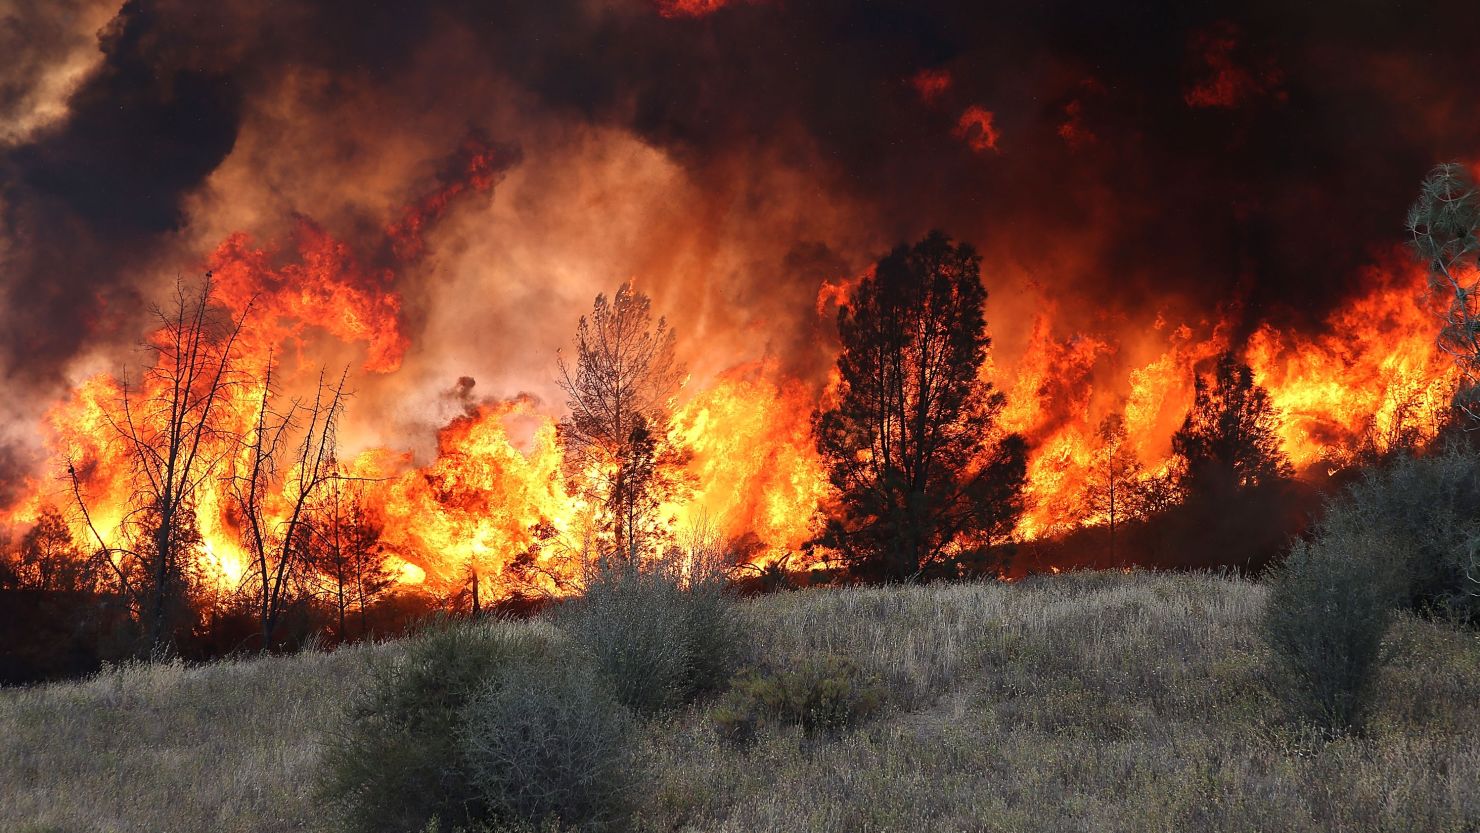 Firefighters used a backfire to try to head off the Rocky Fire on Monday near Clearlake, California.